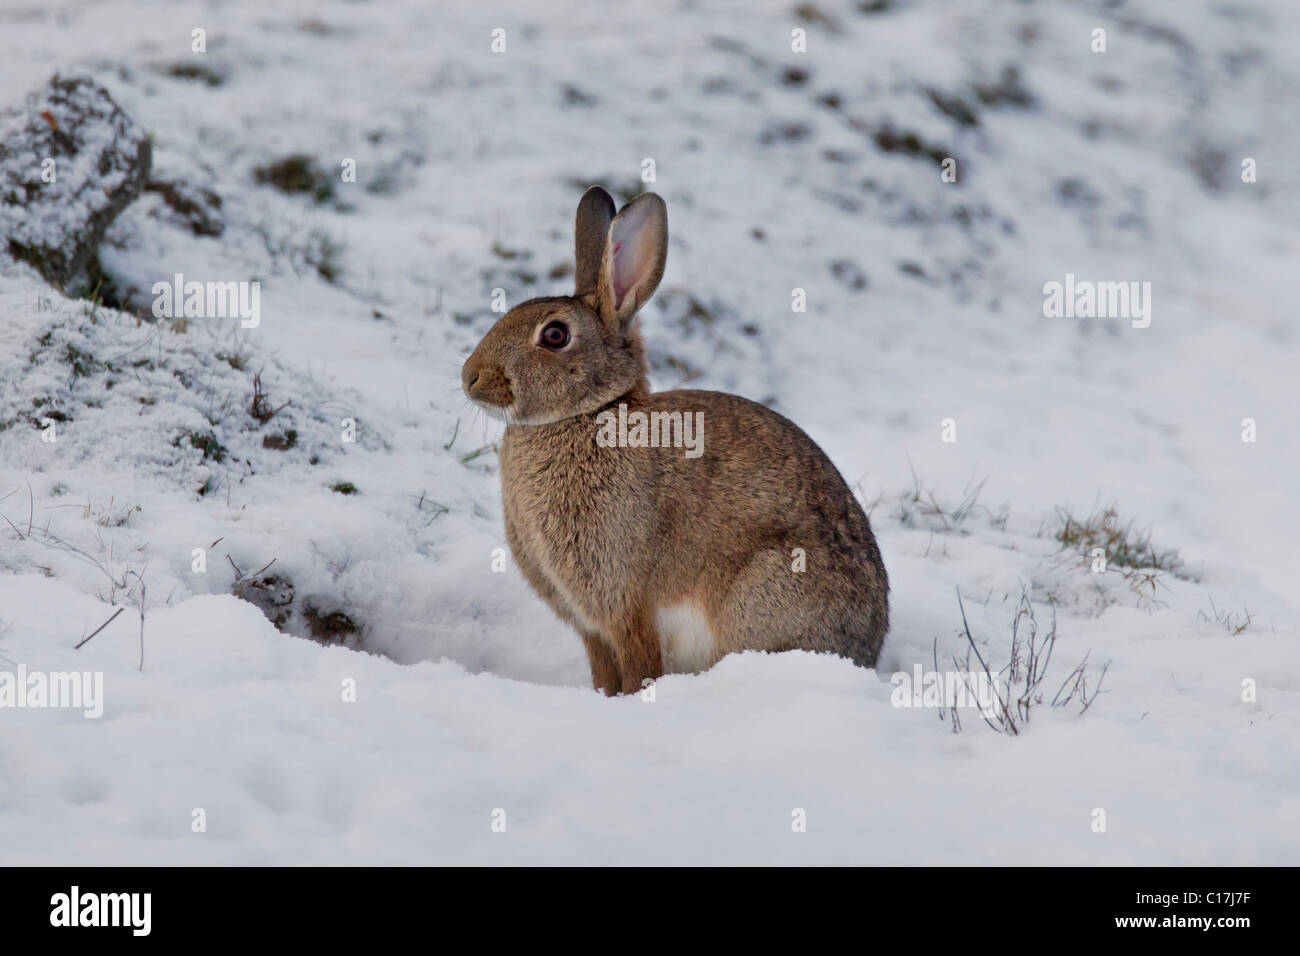 European rabbit (Oryctolagus cuniculus) sitting in the snow in winter, Germany Stock Photo